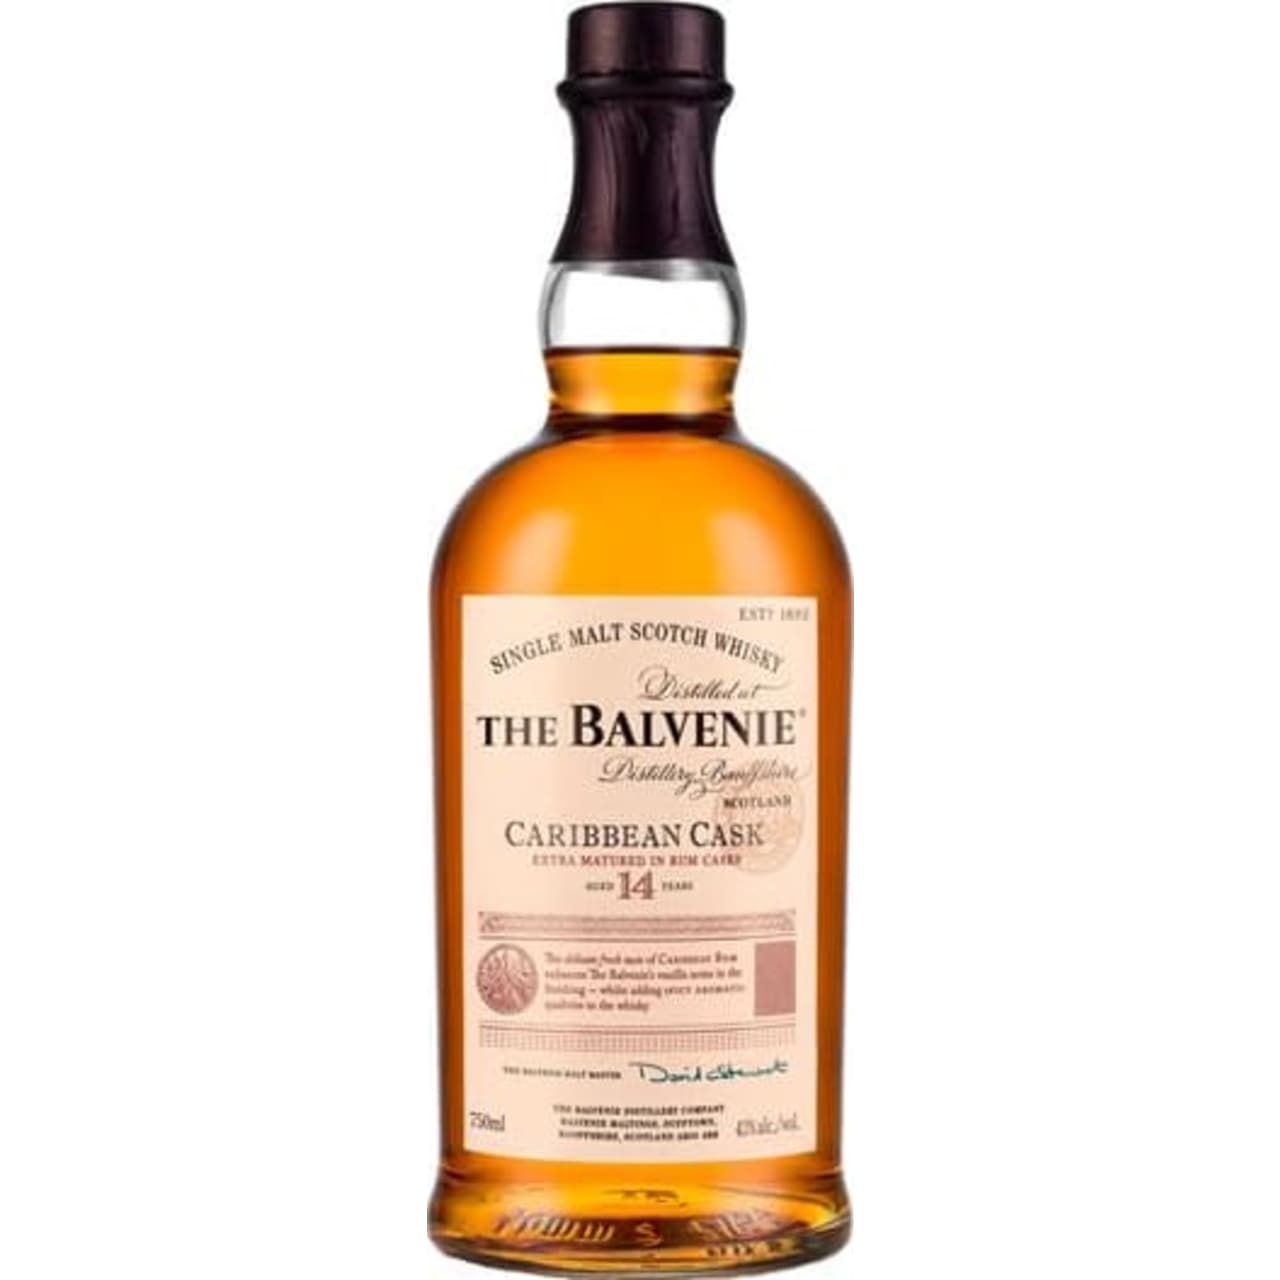 A well-rounded whisky with notes of toffee, fruit and vanilla.